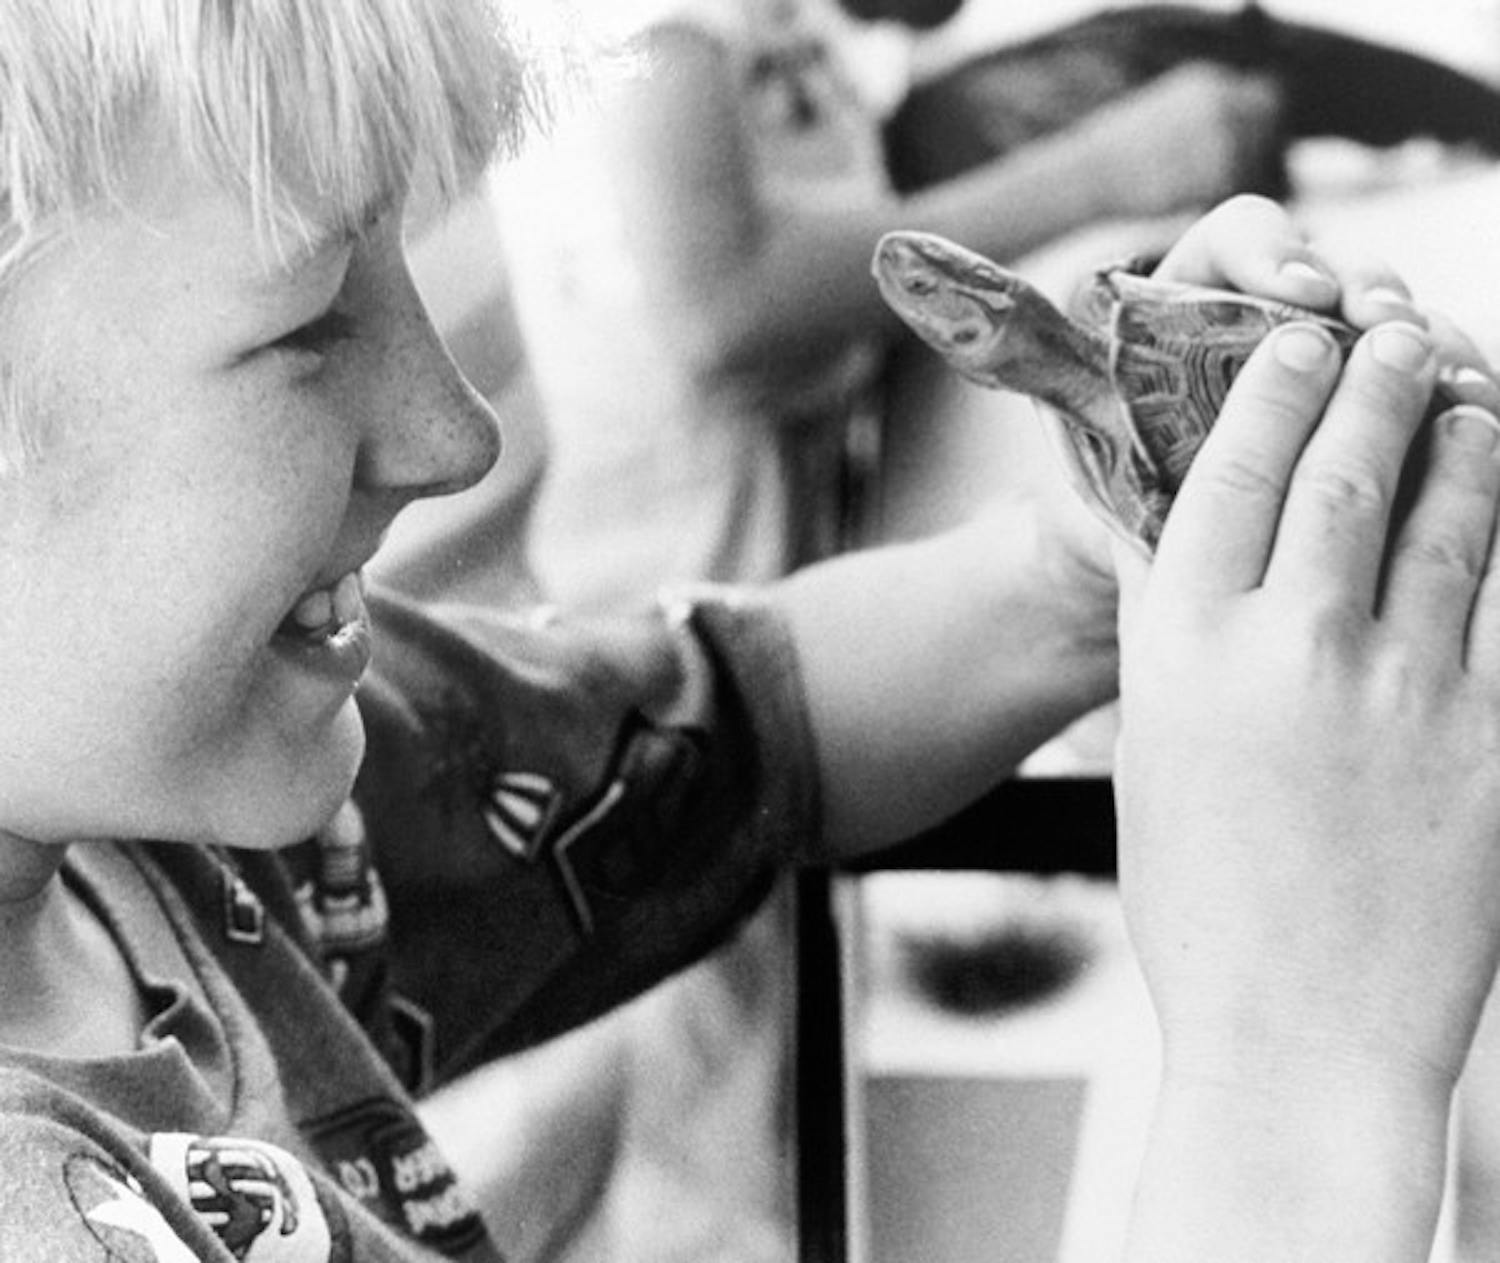 NEW FRIENDS: David Borshein, 8, from Mesa learns about wildlife at ASU in 1988. (Photo by Irwin Daugherty)